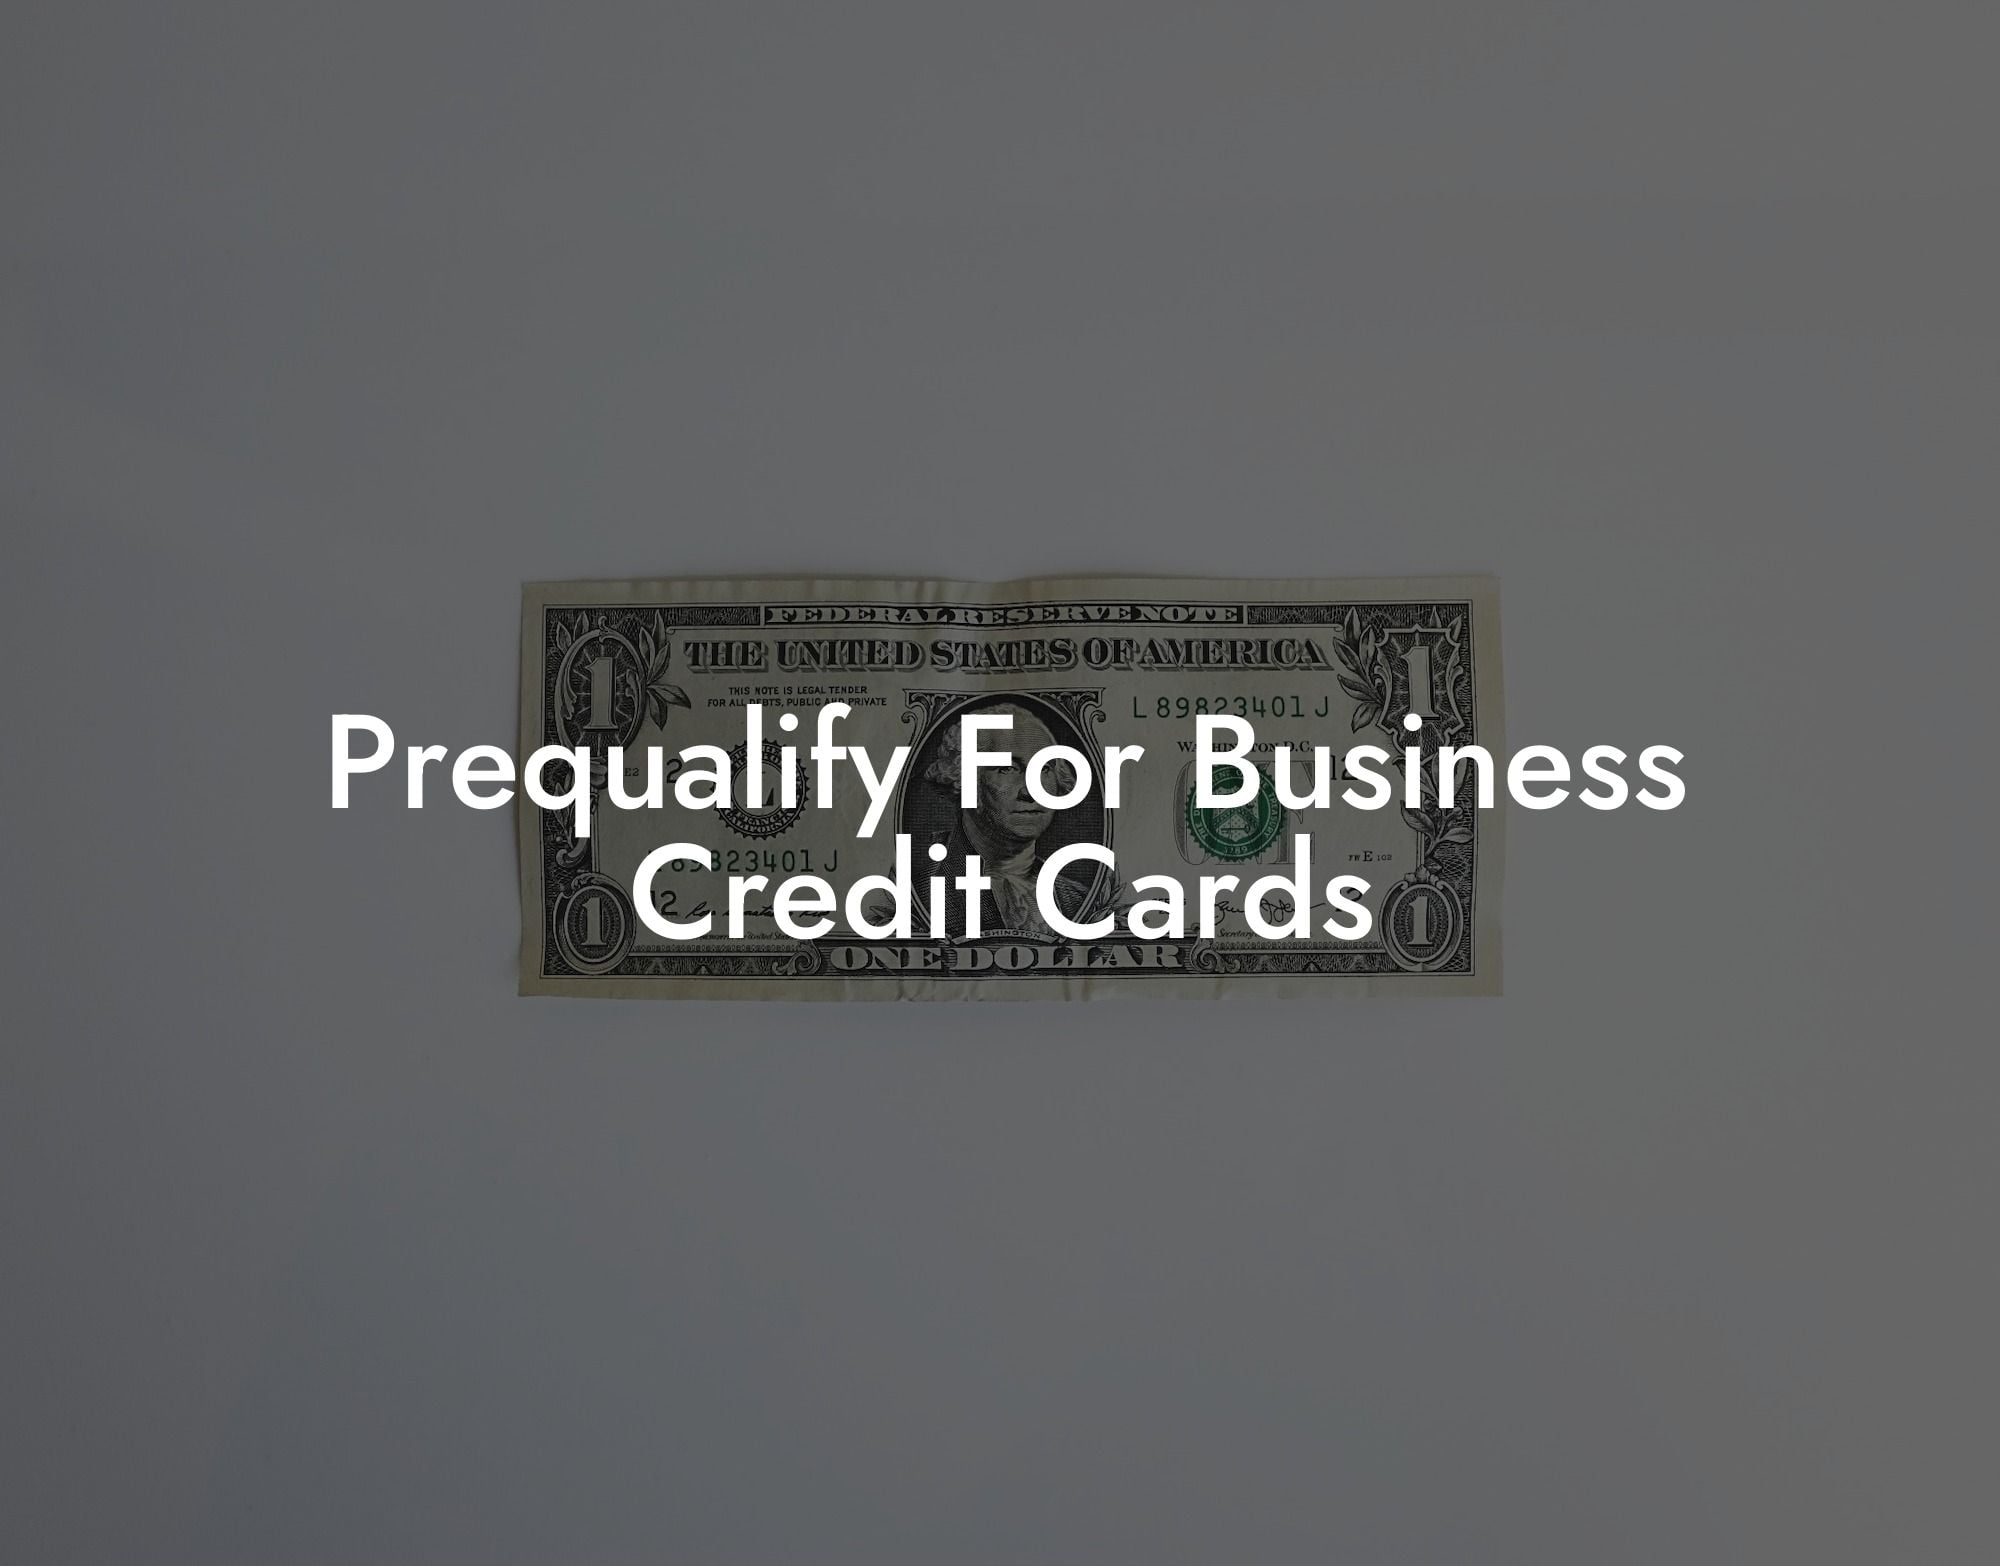 Prequalify For Business Credit Cards